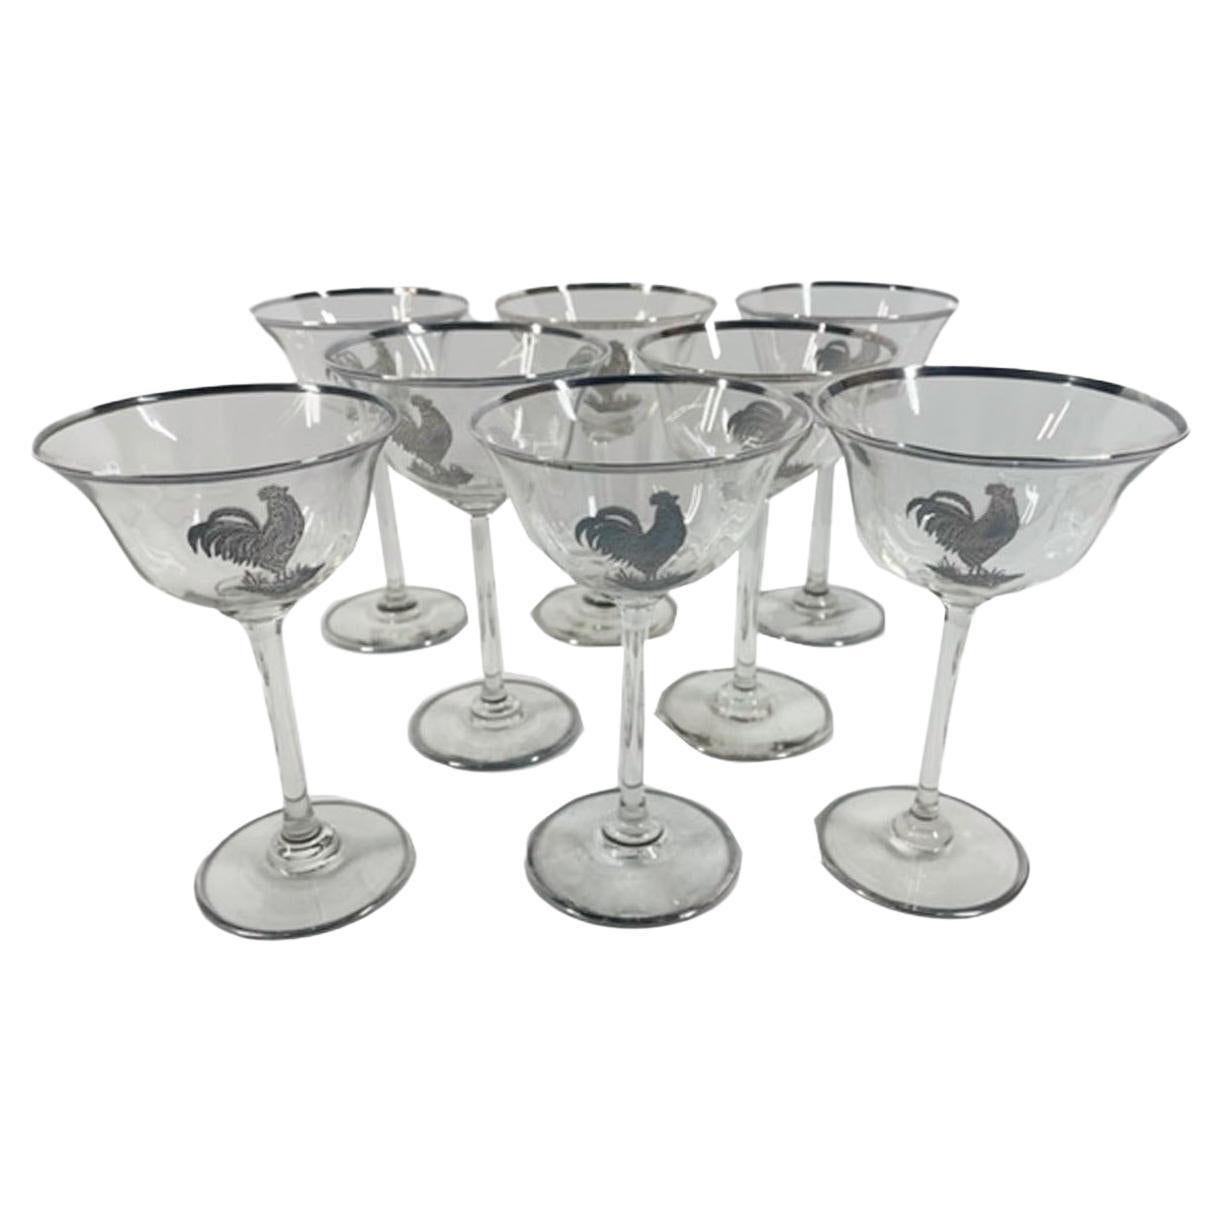 Art Deco Silver Overlay Optical Glass Martini Glasses with Roosters